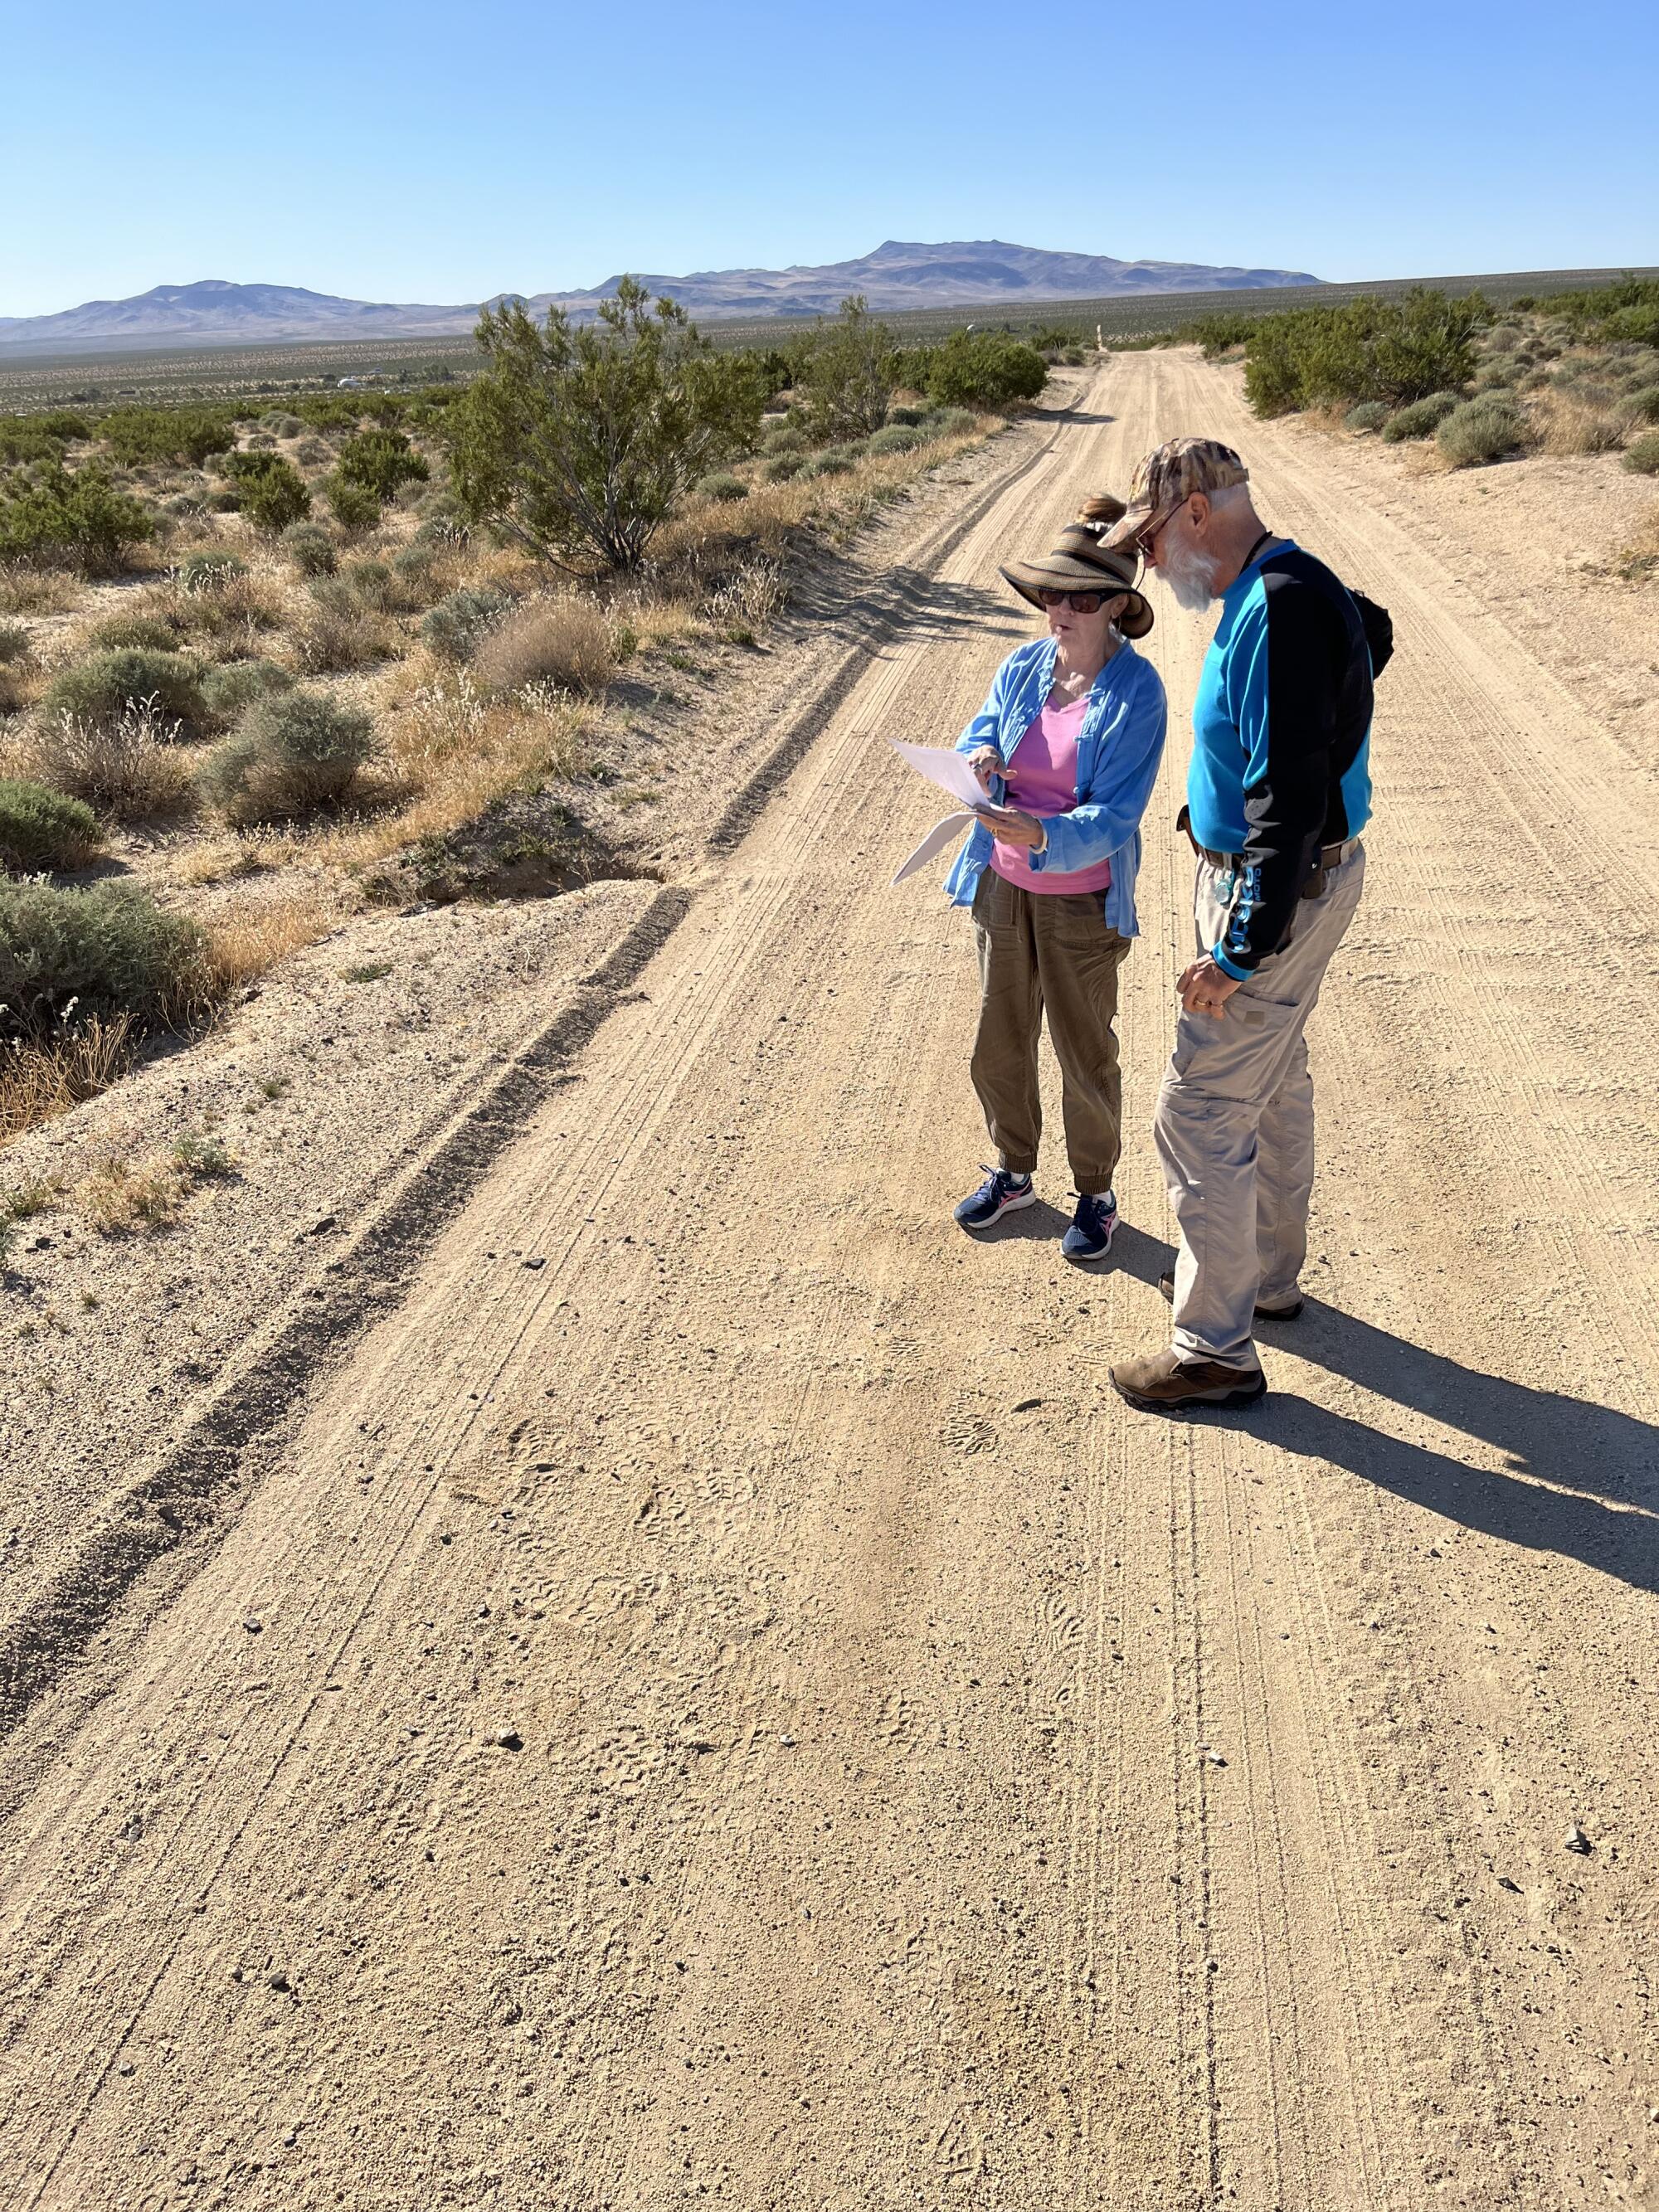 Two people standing on a dirt road in Ridgecrest